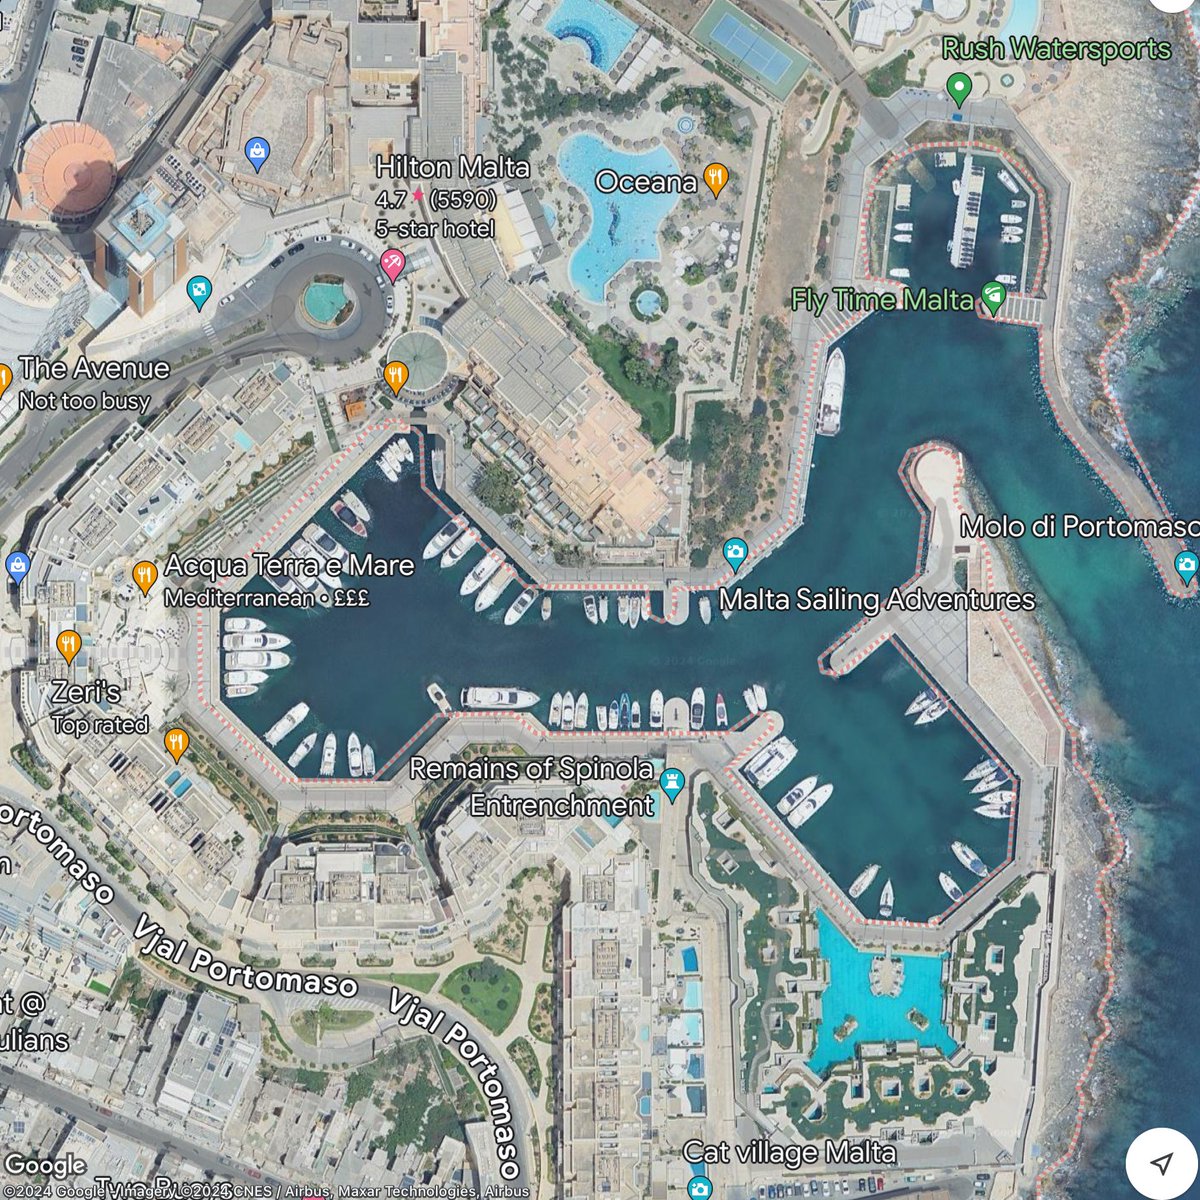 @CorkFella Let’s call a spade a feckin spade 😎 Malta is awash in vatniks. A major crime centre for them, from casinos and prostitution to political muscle. Run a vessel search and see the Vatnik properties and yachts alongside the Hilton Hotel. Check out the activity of Sotheby’s Malta…